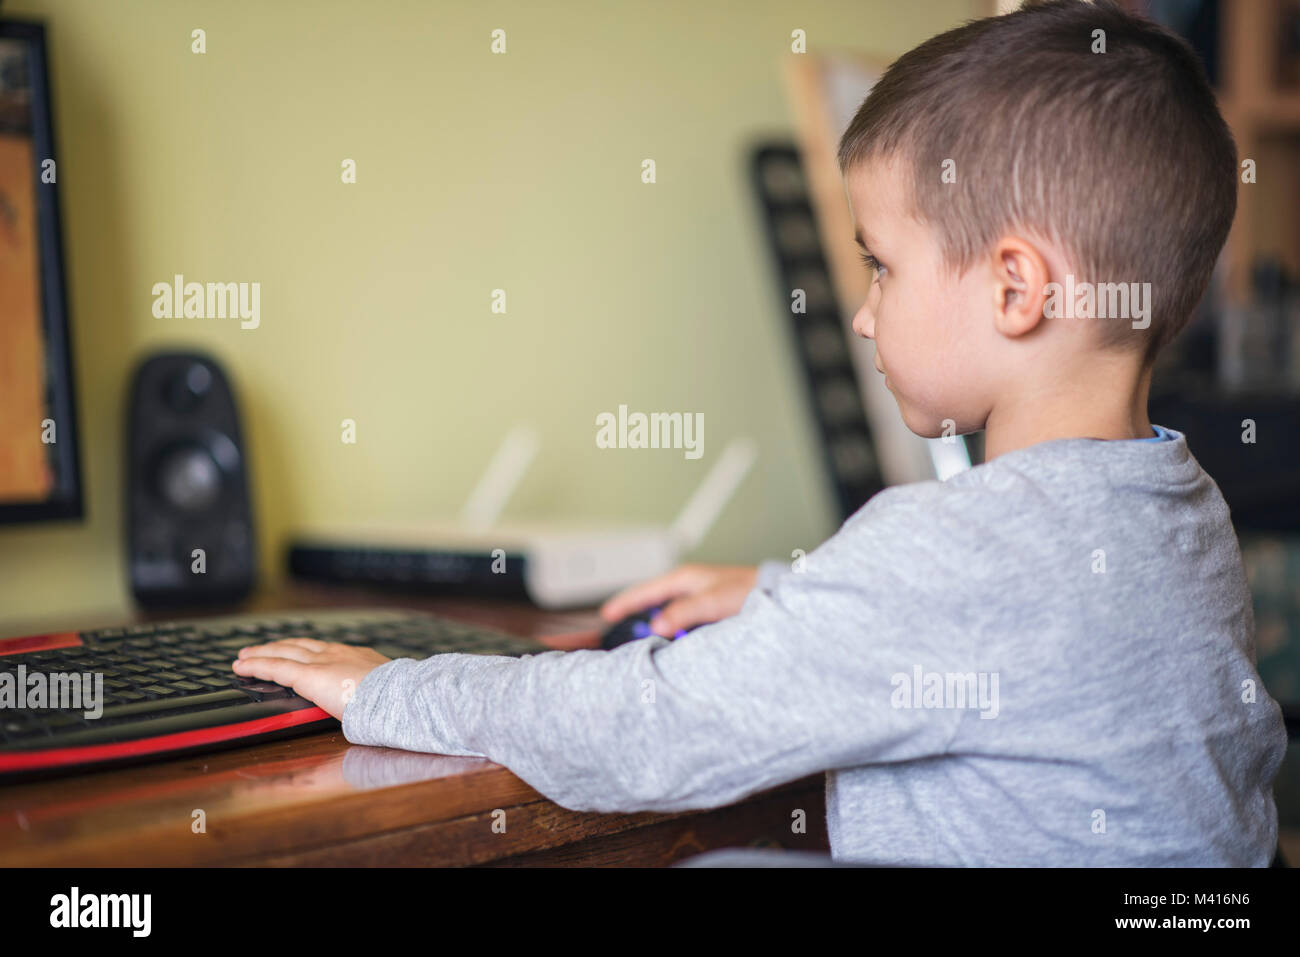 Young boy playing games on a desktop computer Stock Photo